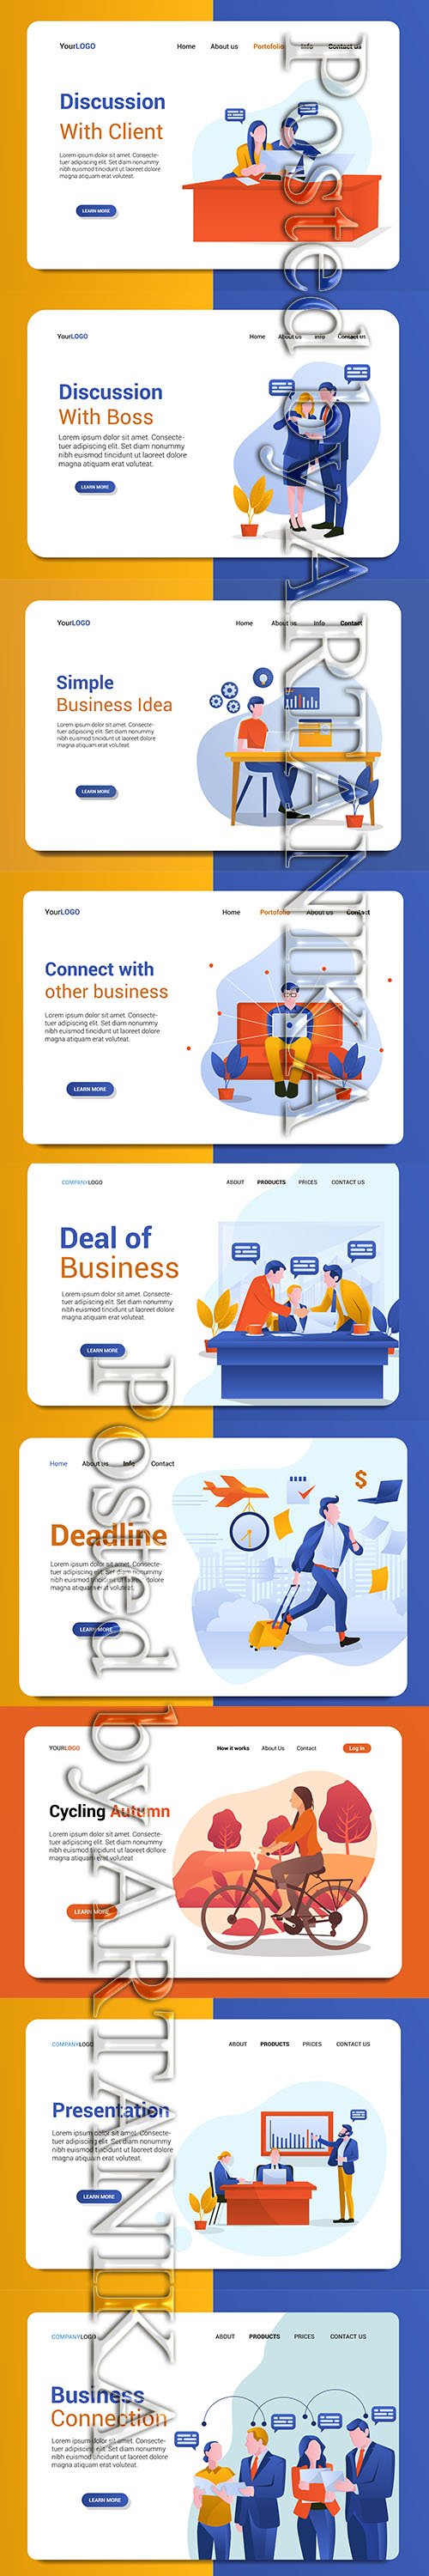 Business Template Set - Landing Page Backgrounds Vol 3